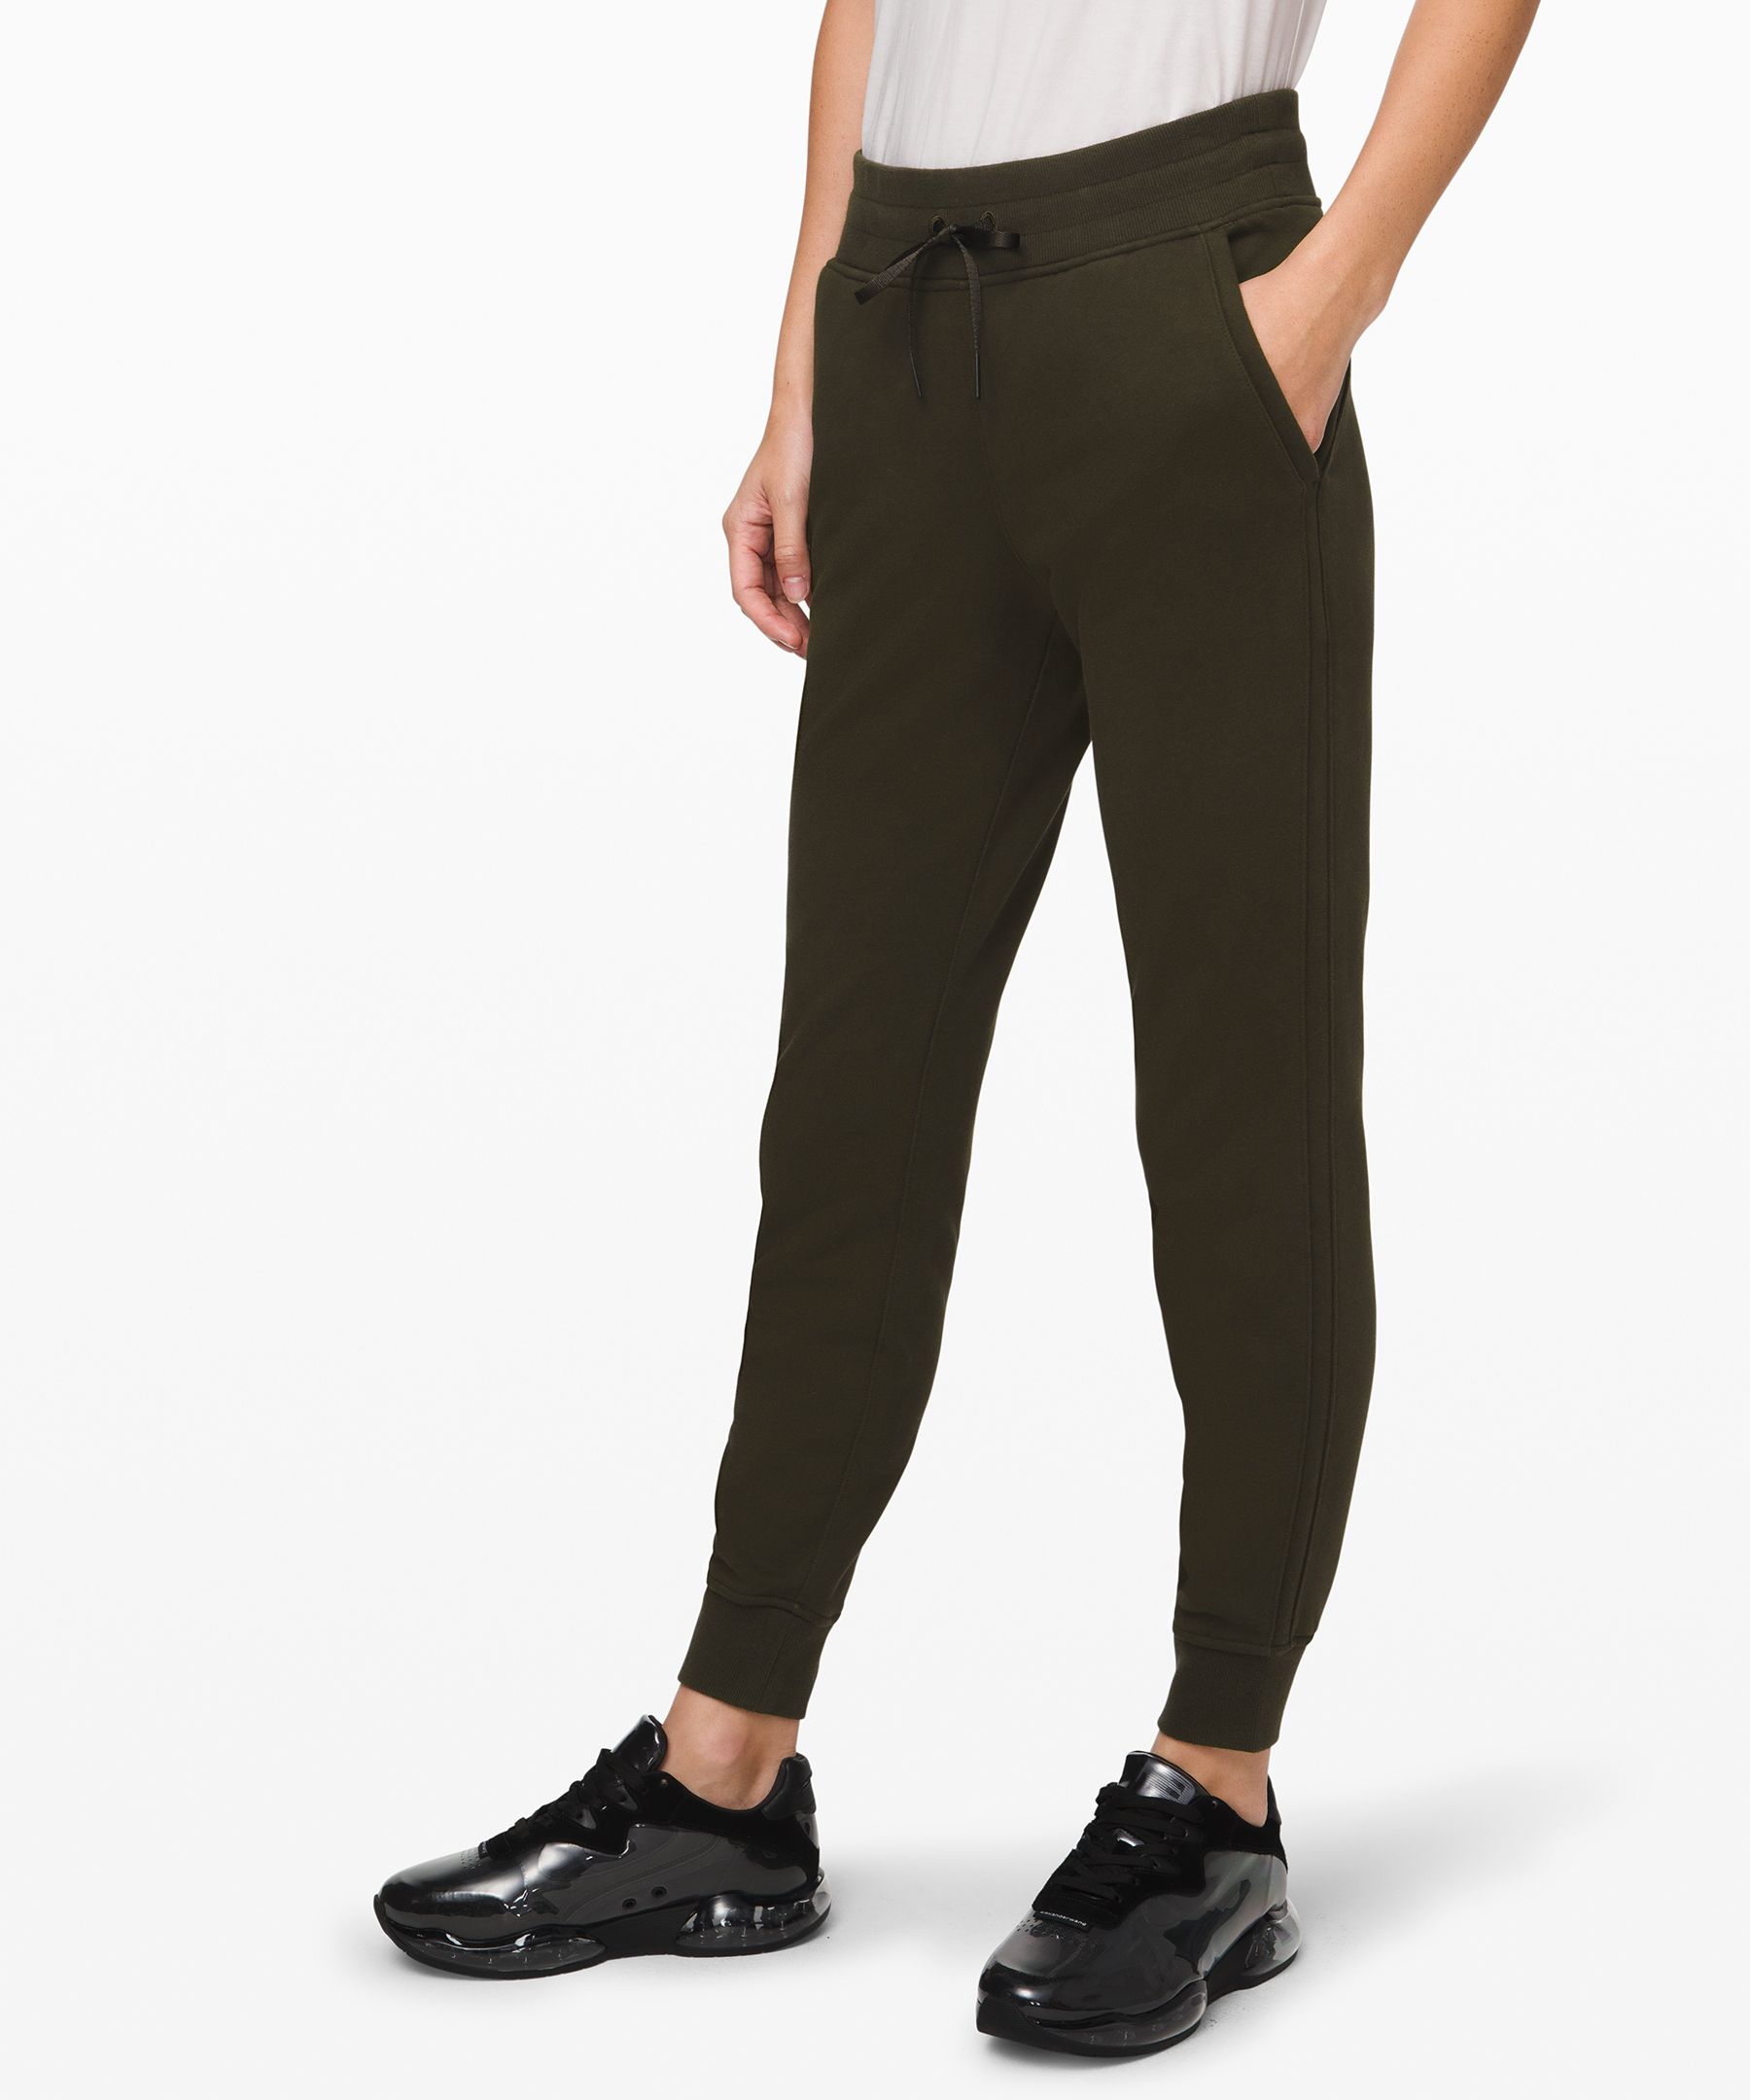 On The Fly Pants Lululemon Reviewed